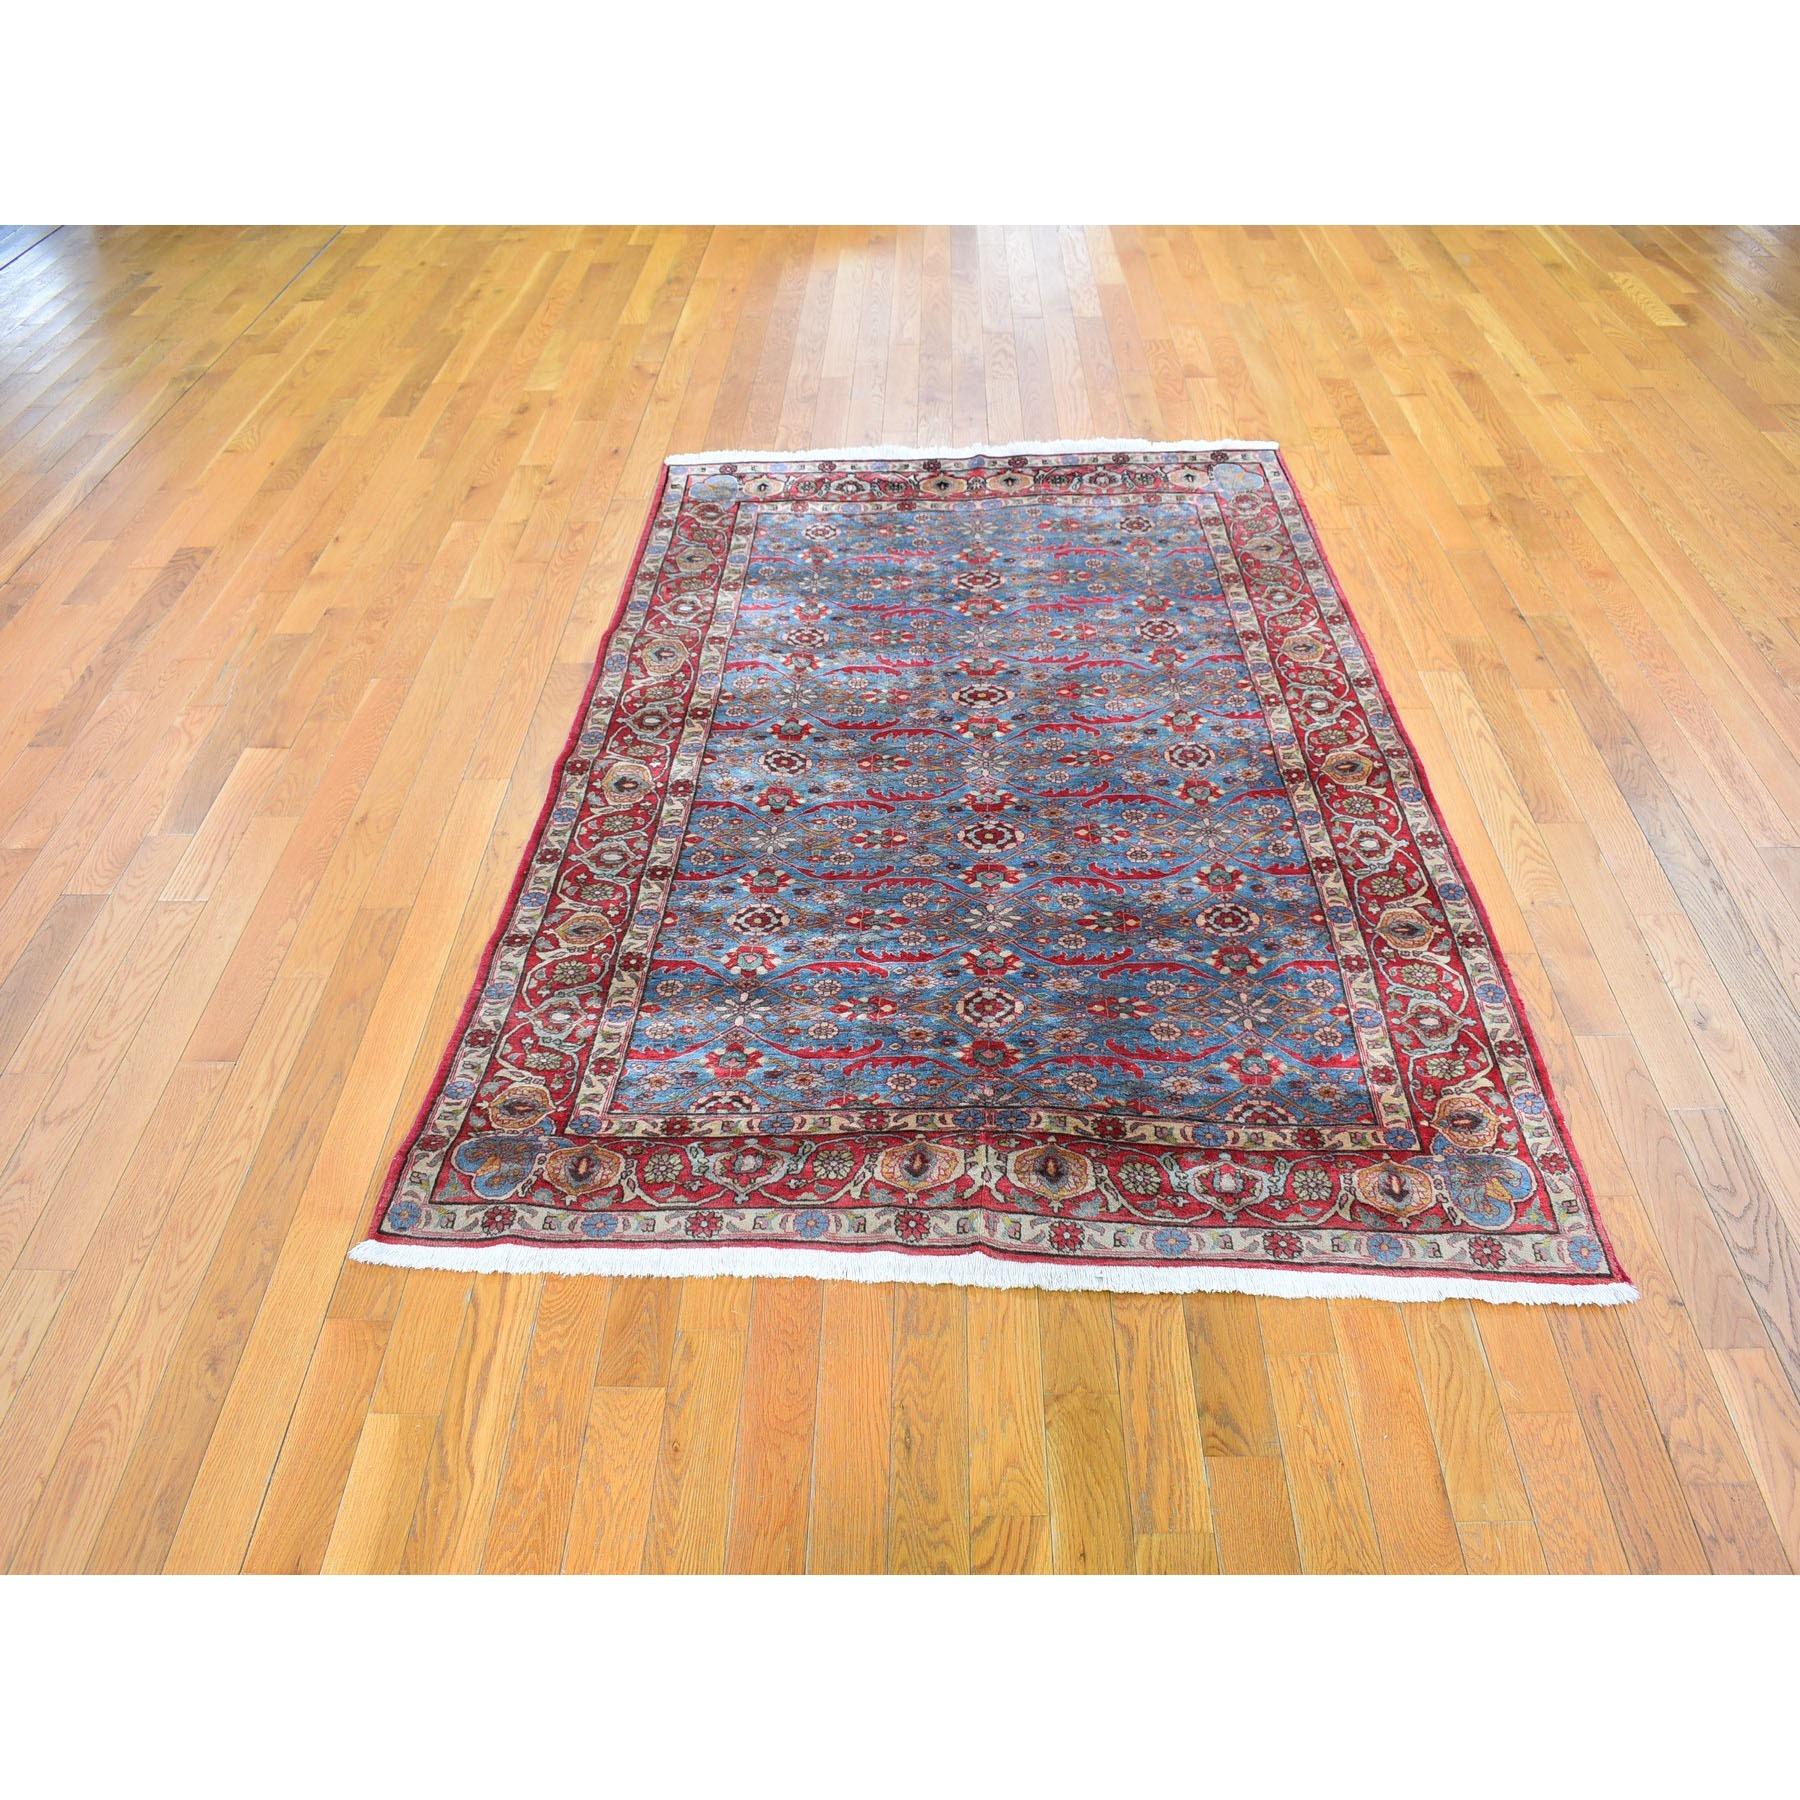 This fabulous hand-knotted carpet has been created and designed for extra strength and durability. This rug has been handcrafted for weeks in the traditional method that is used to make
Exact Rug Size in Feet and Inches : 4'9